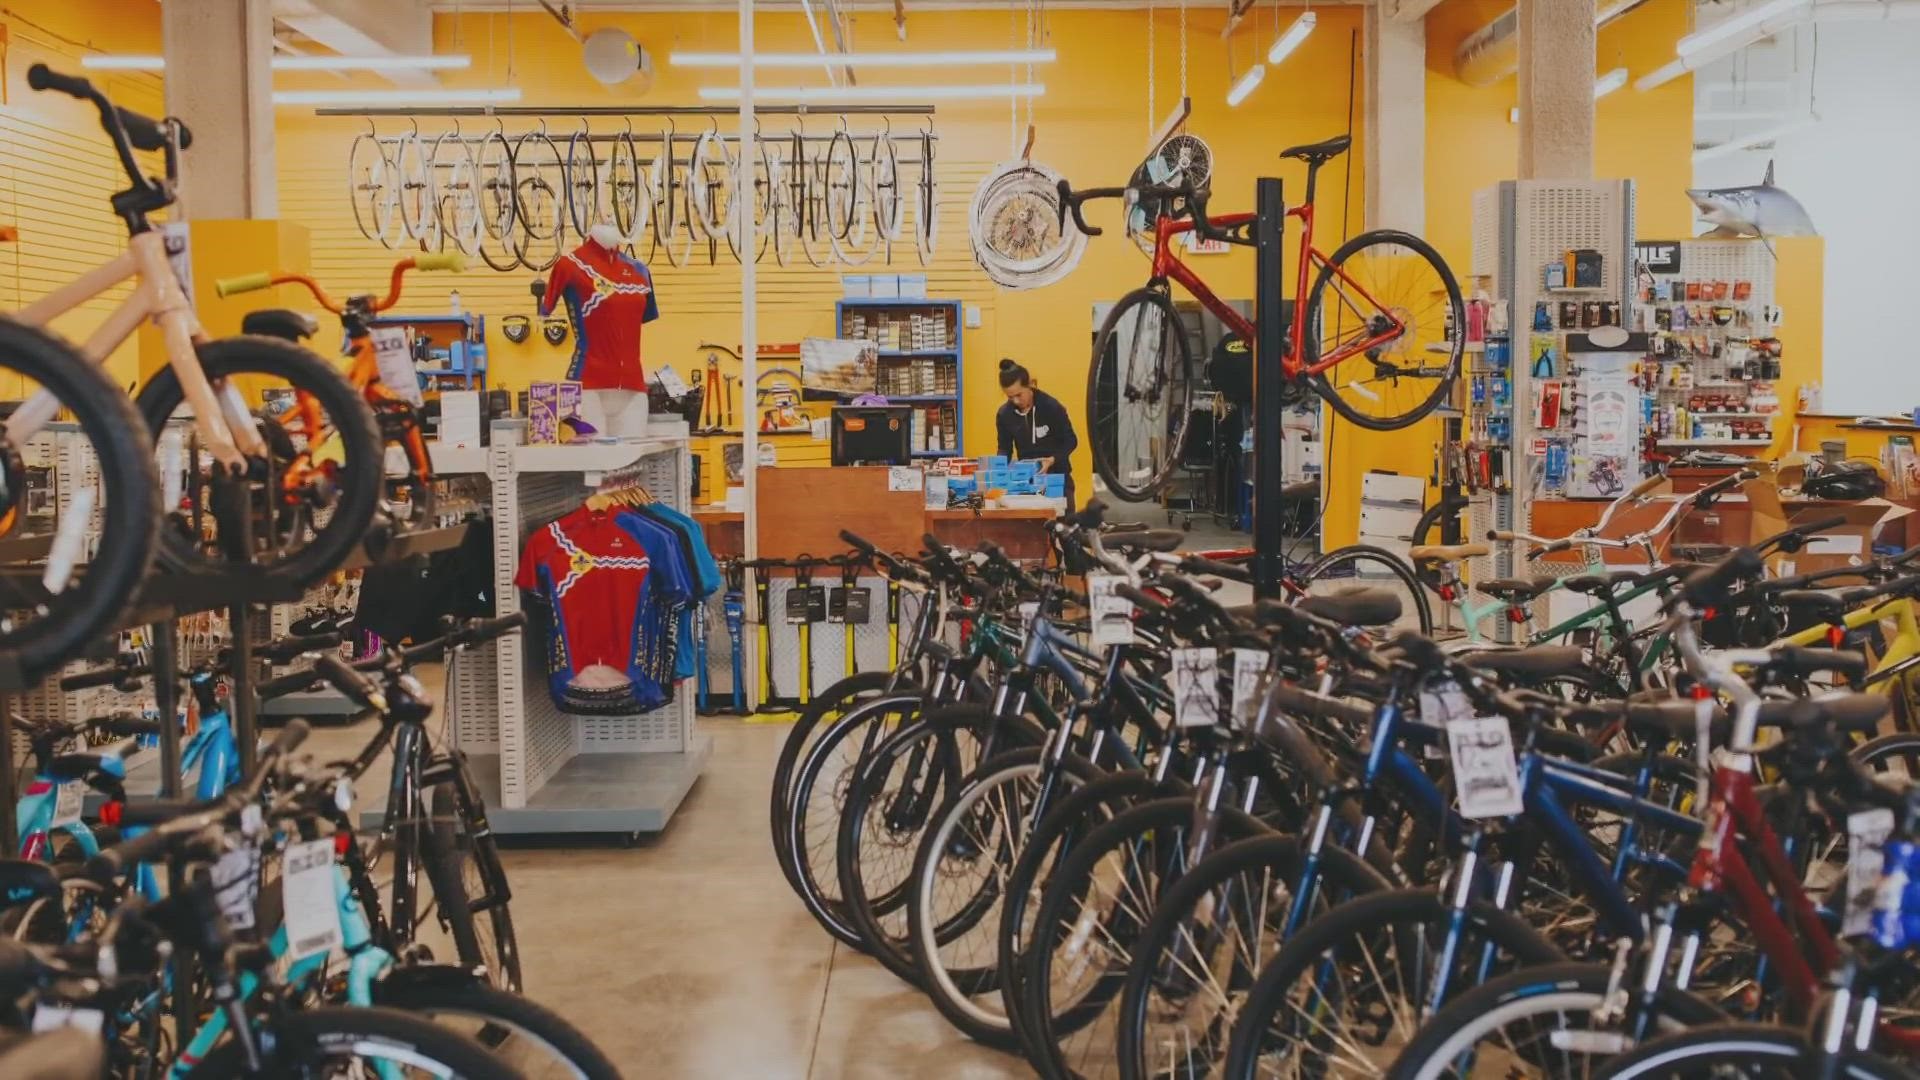 St. Louis visitors can rent bikes from Urban Shark at City Foundry STL.